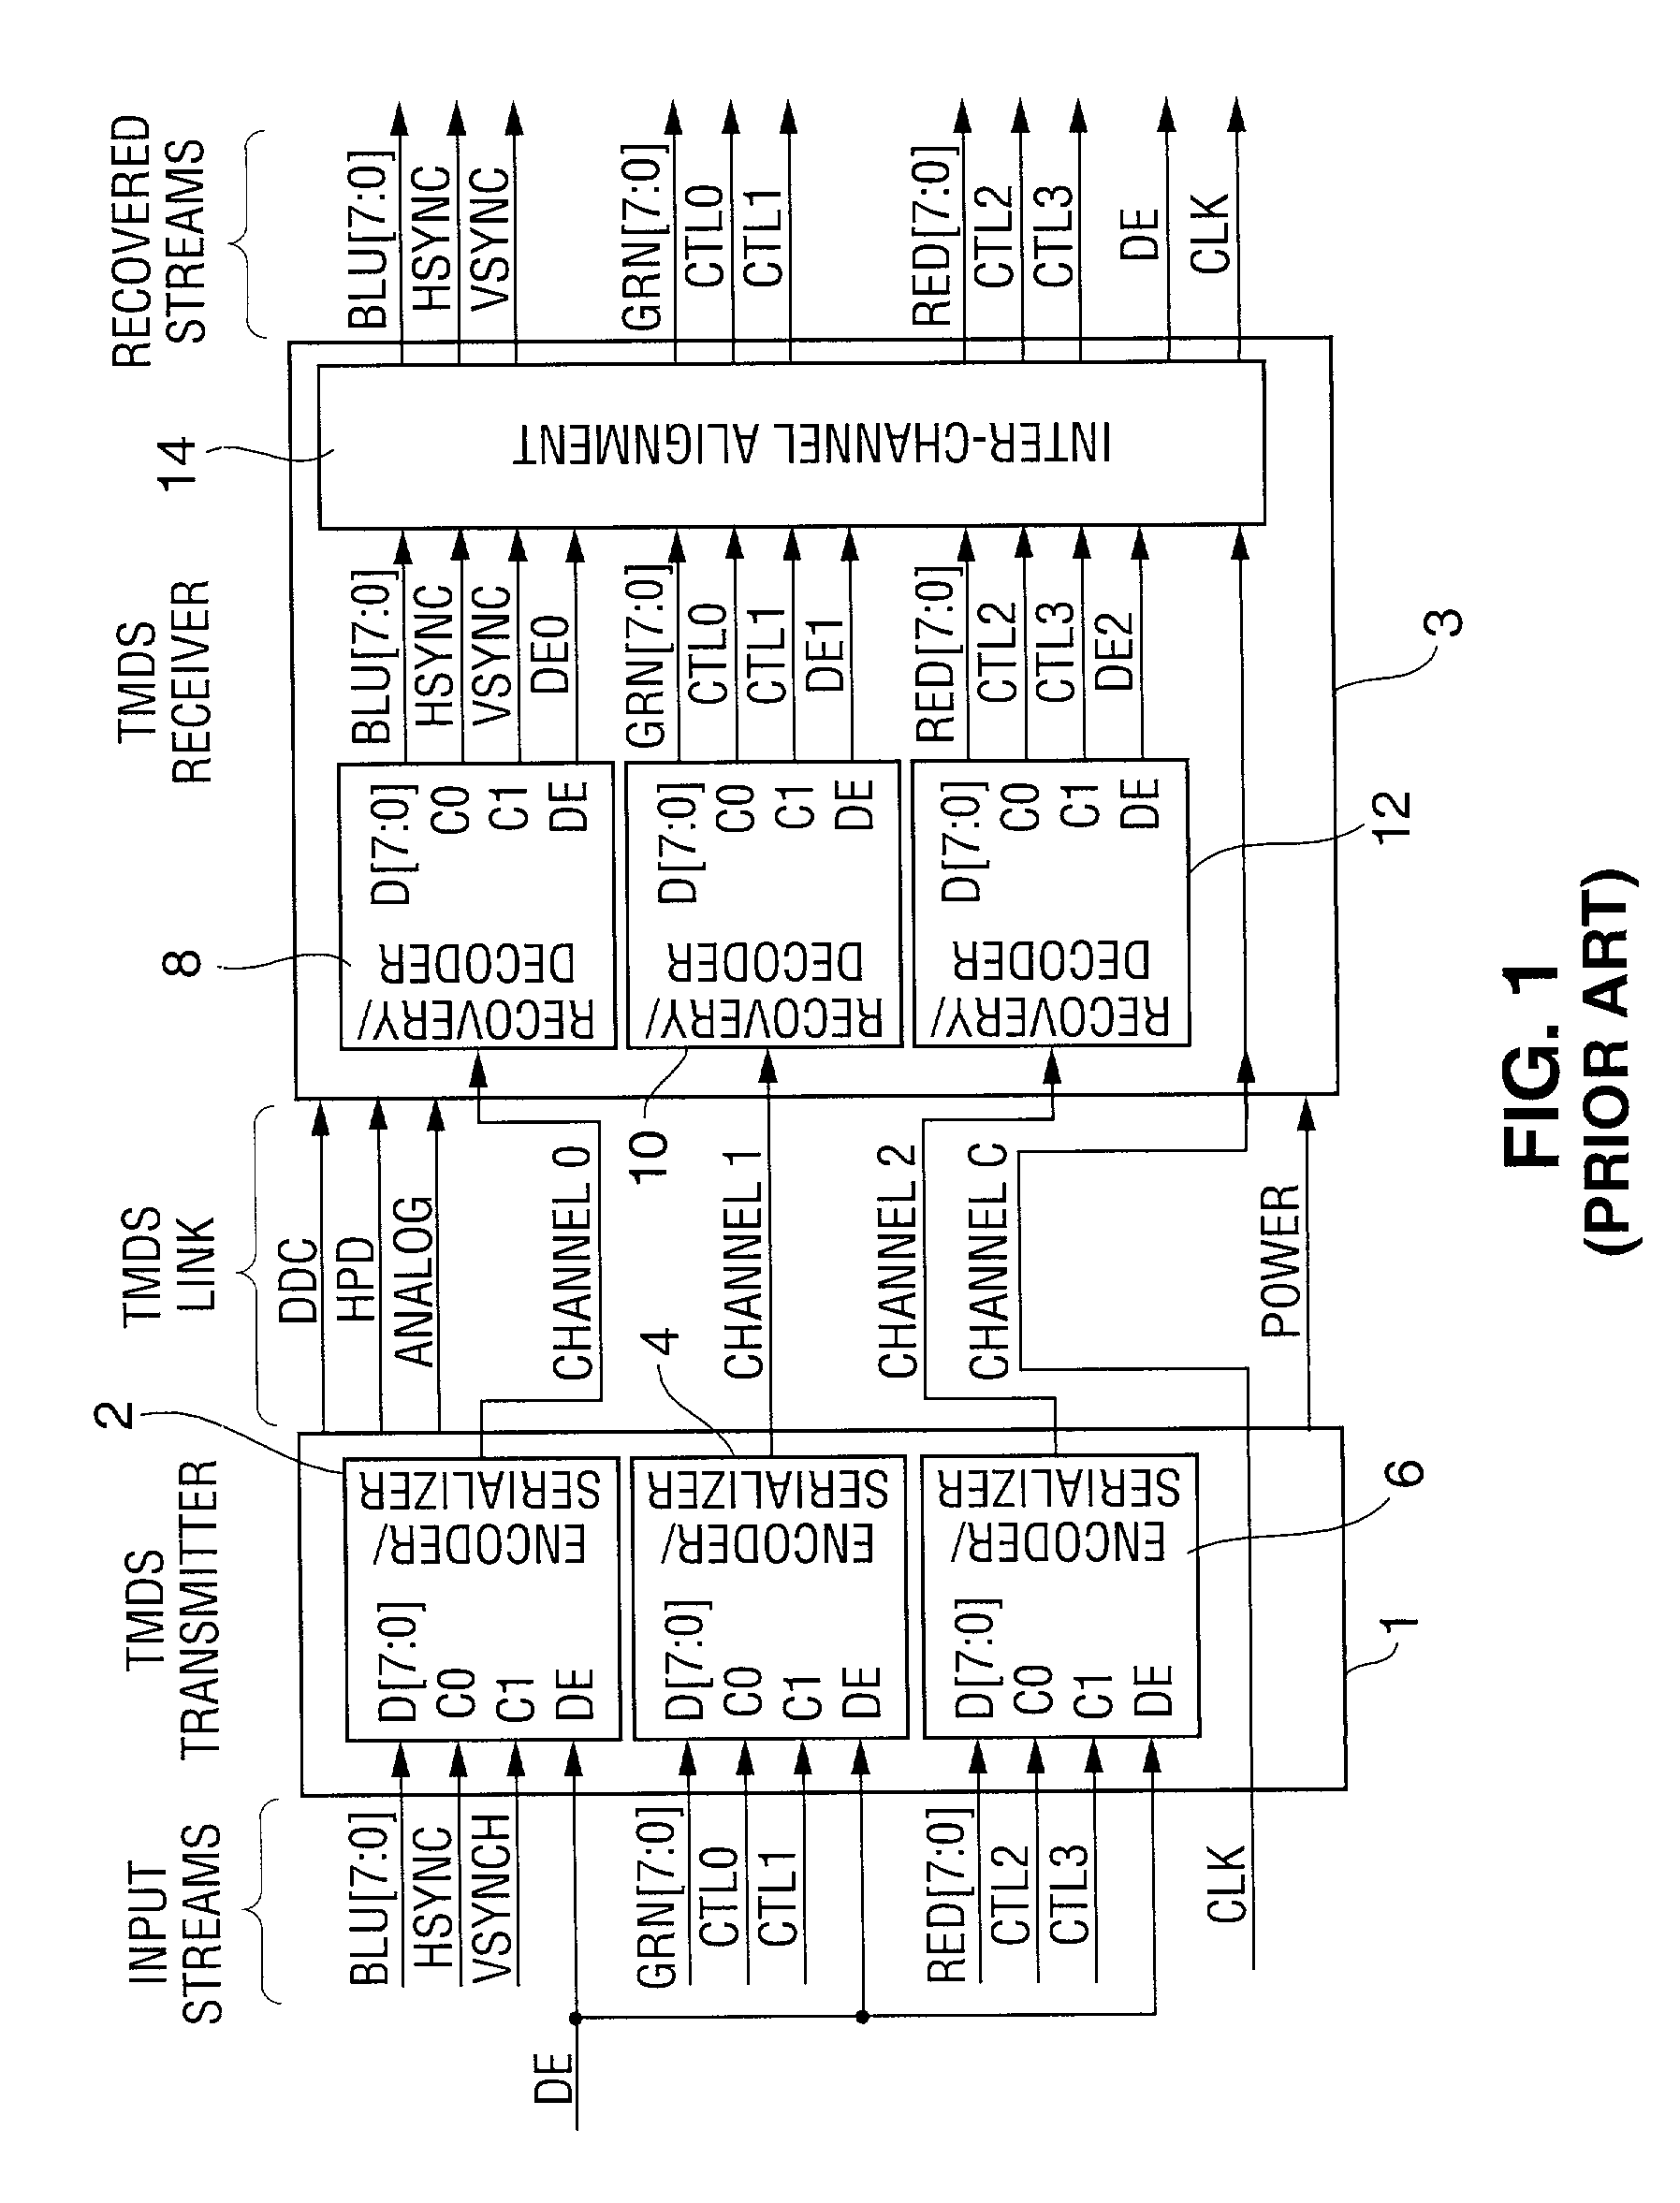 Method and apparatus for synchronizing auxiliary data and video data transmitted over a TMDS-like link